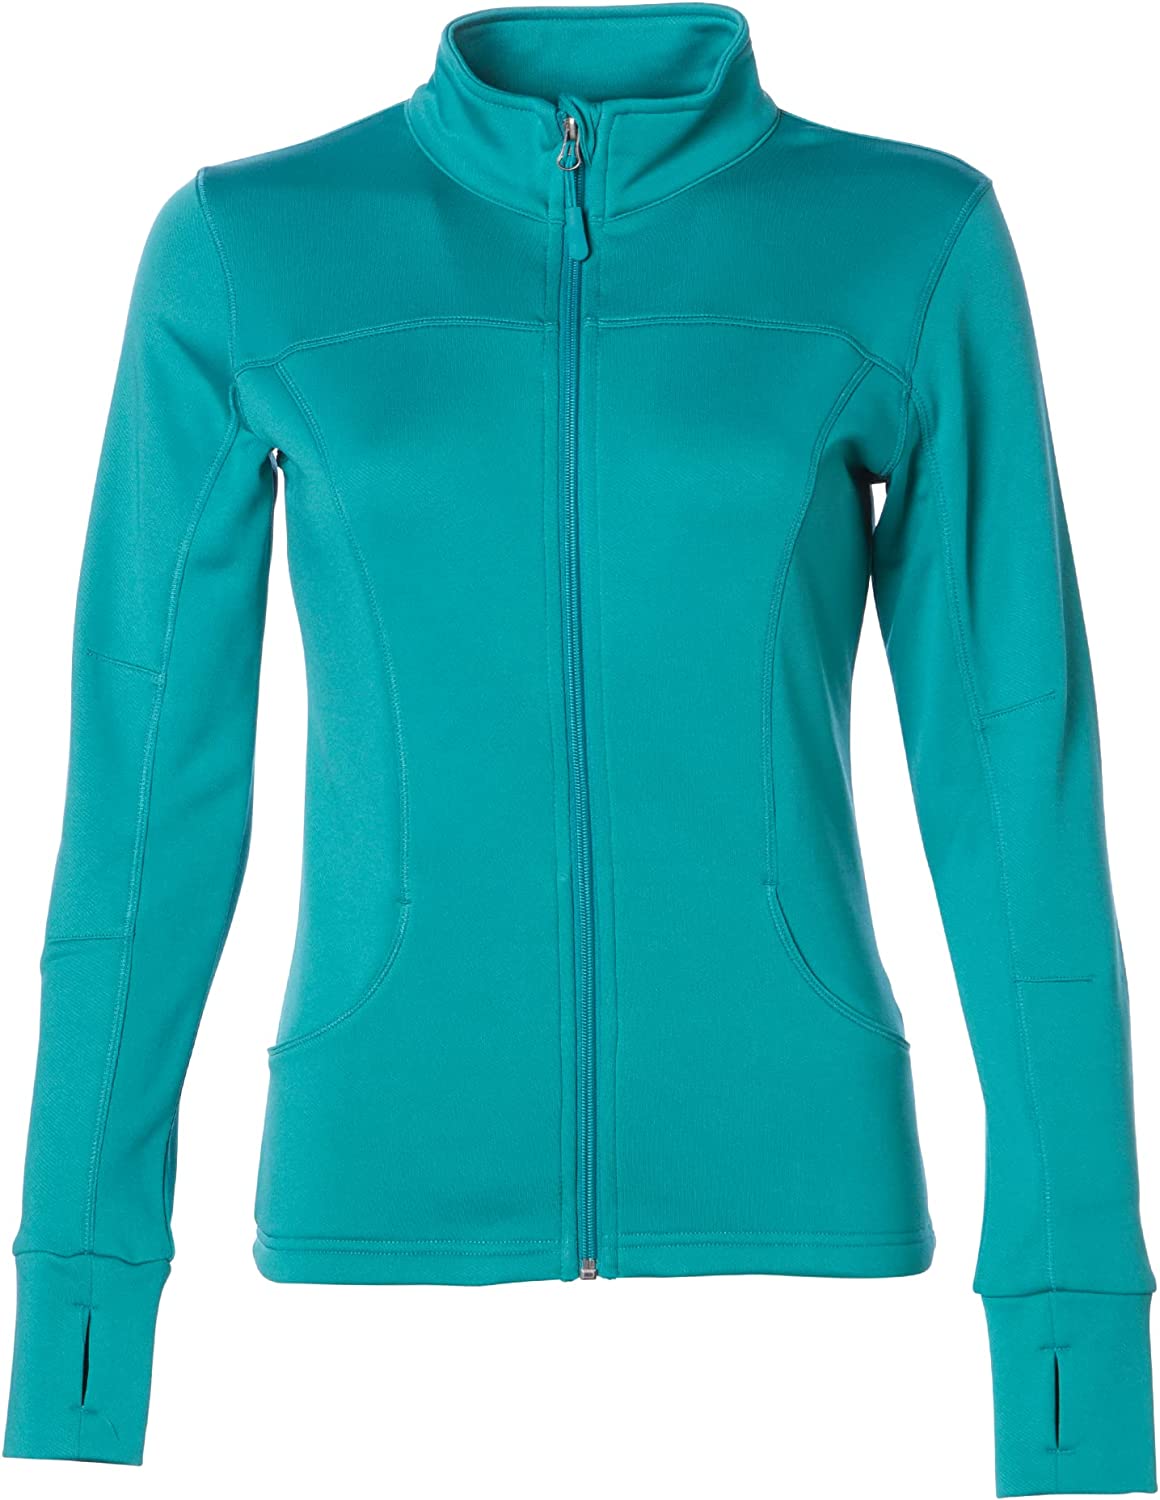 Global Blank Athletic Workout Jackets For Women, Full Zip-Up